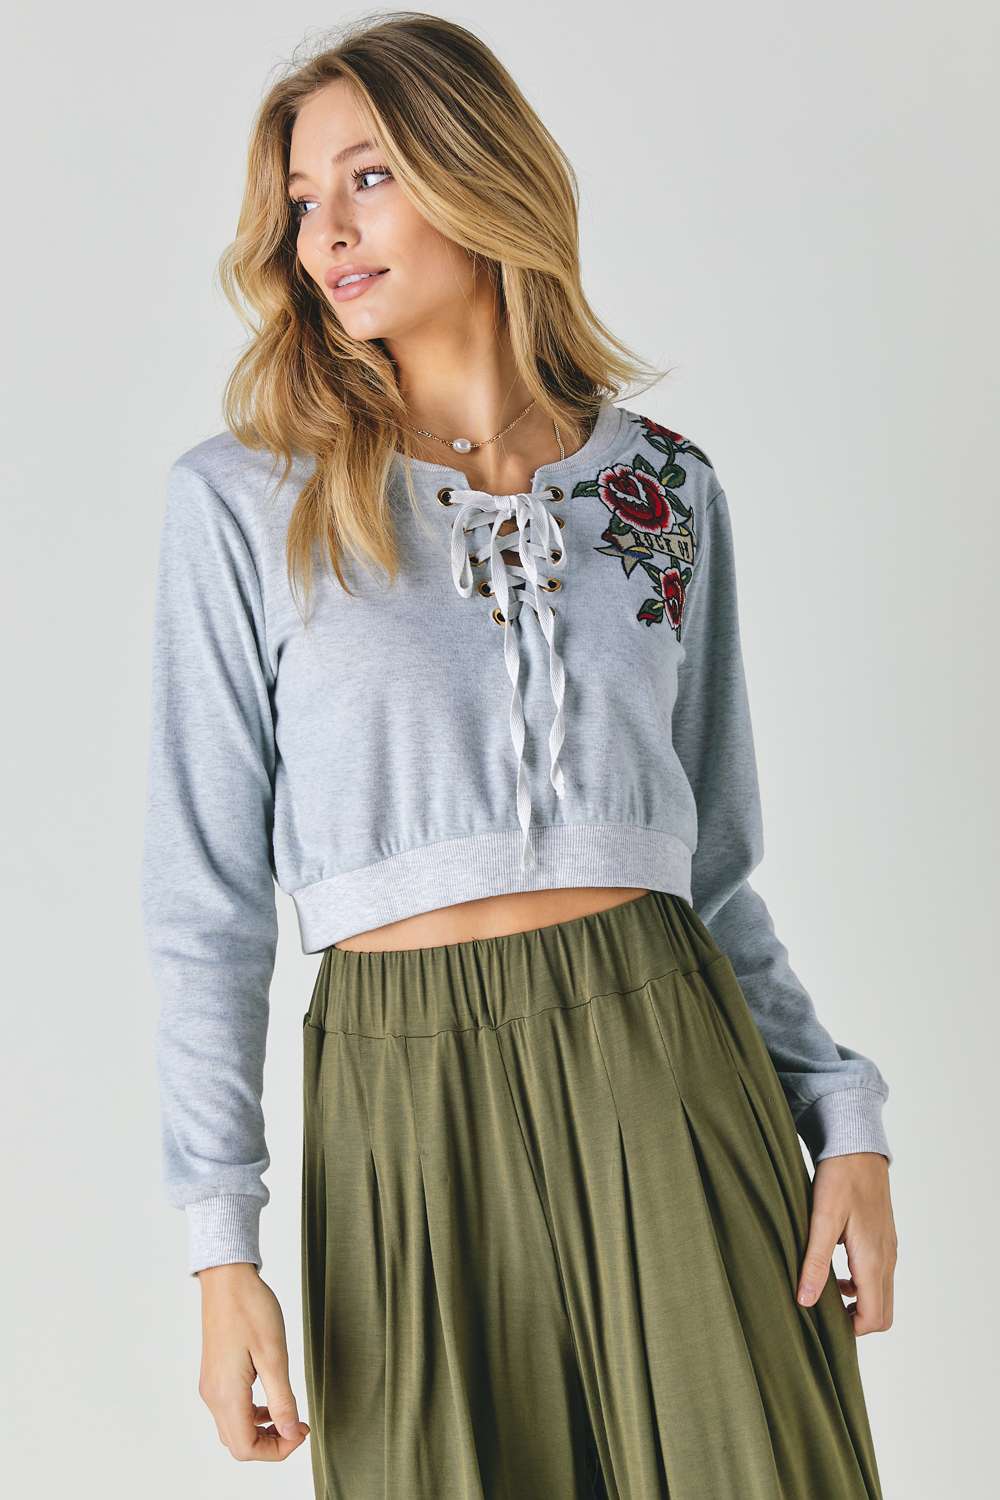 Floral Embroidered Cropped Sweatshirt Sunny EvE Fashion